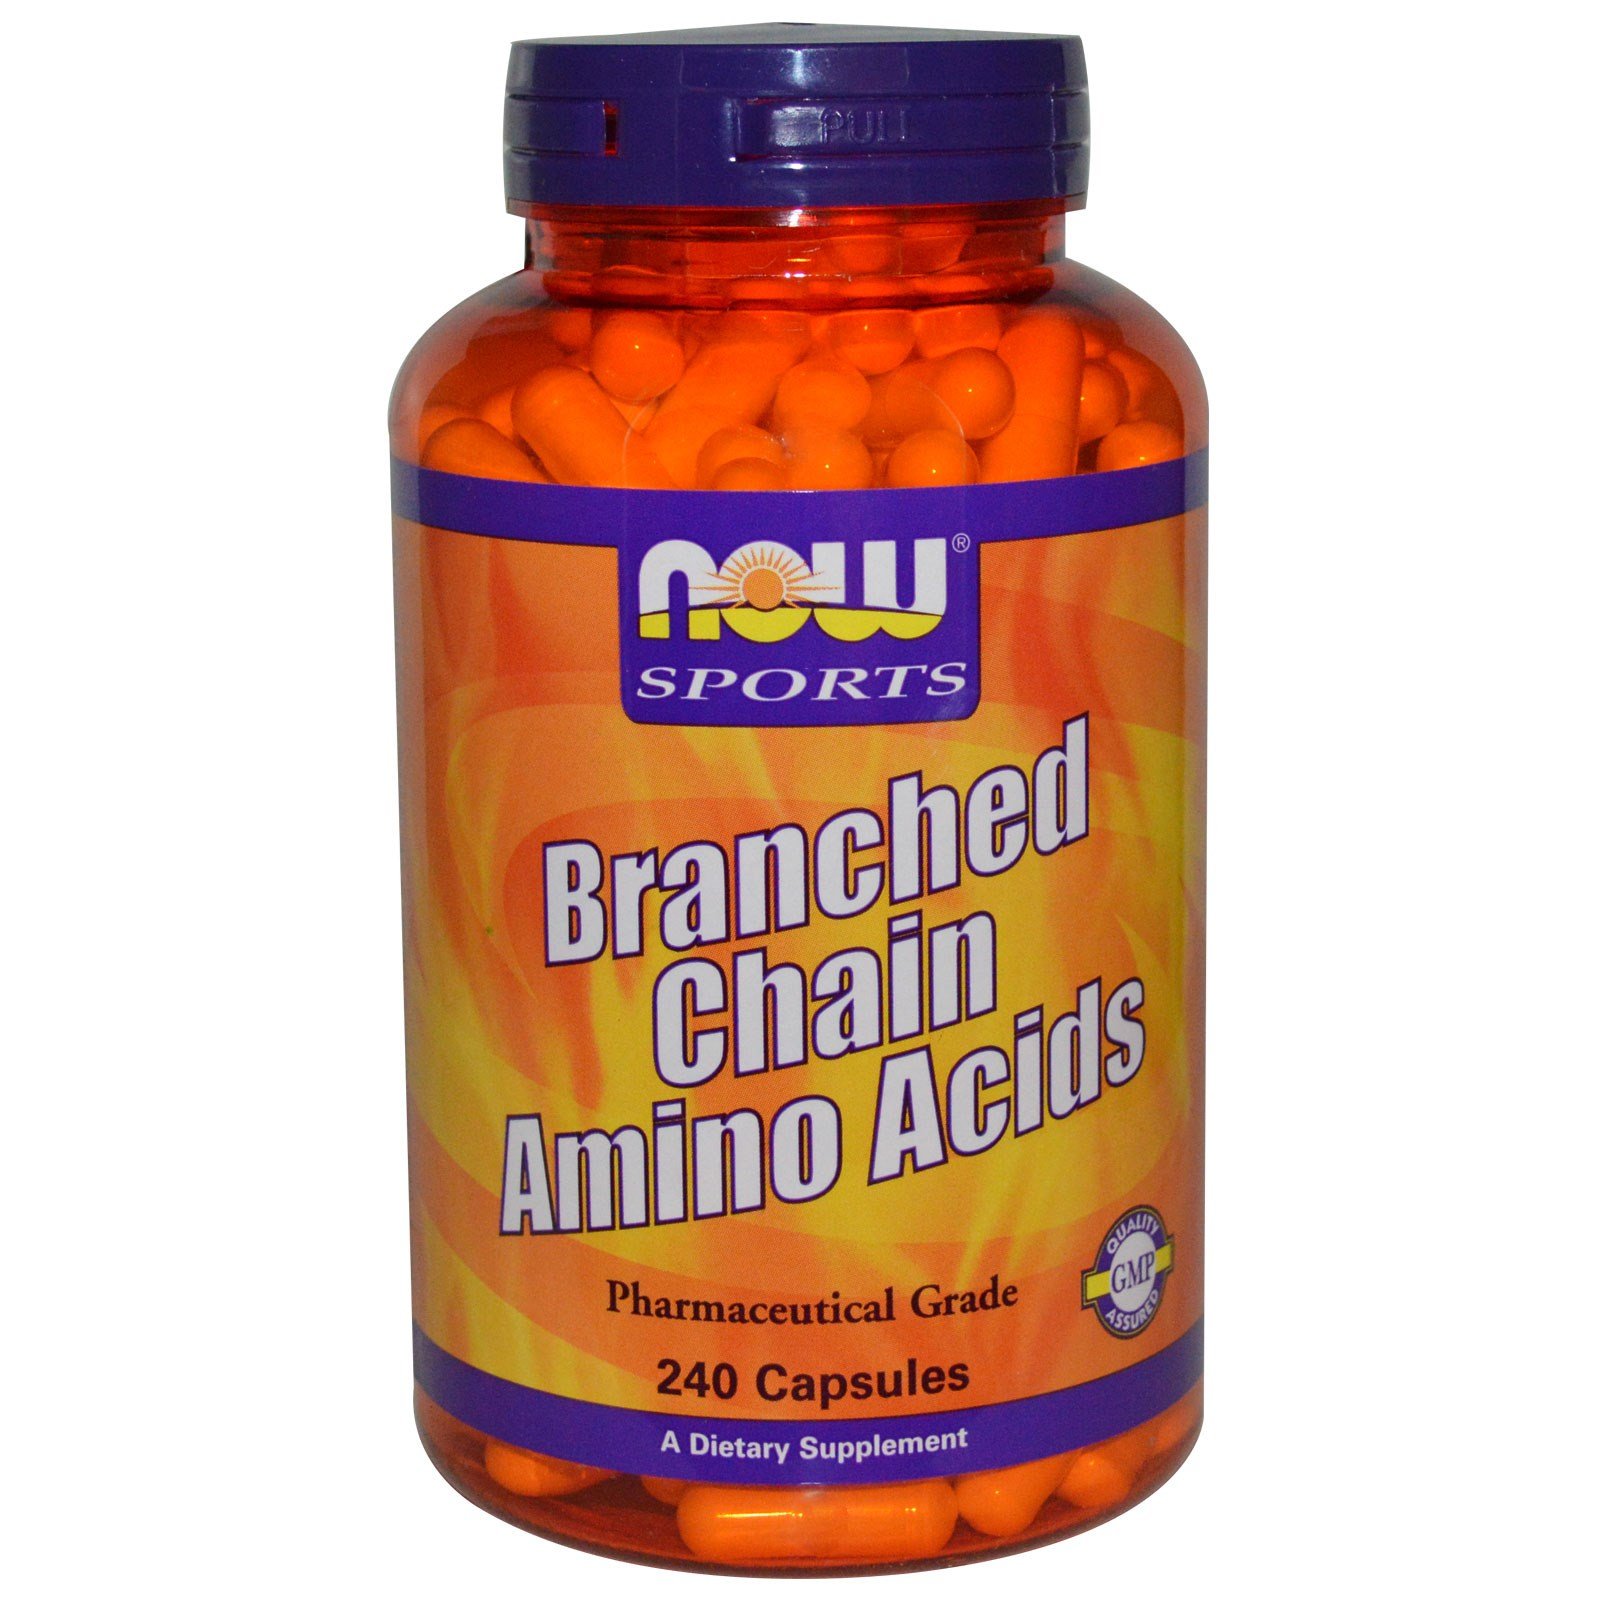 Branched Chain Amino Acids, 240 piezas, Now. BCAA. Weight Loss recuperación Anti-catabolic properties Lean muscle mass 